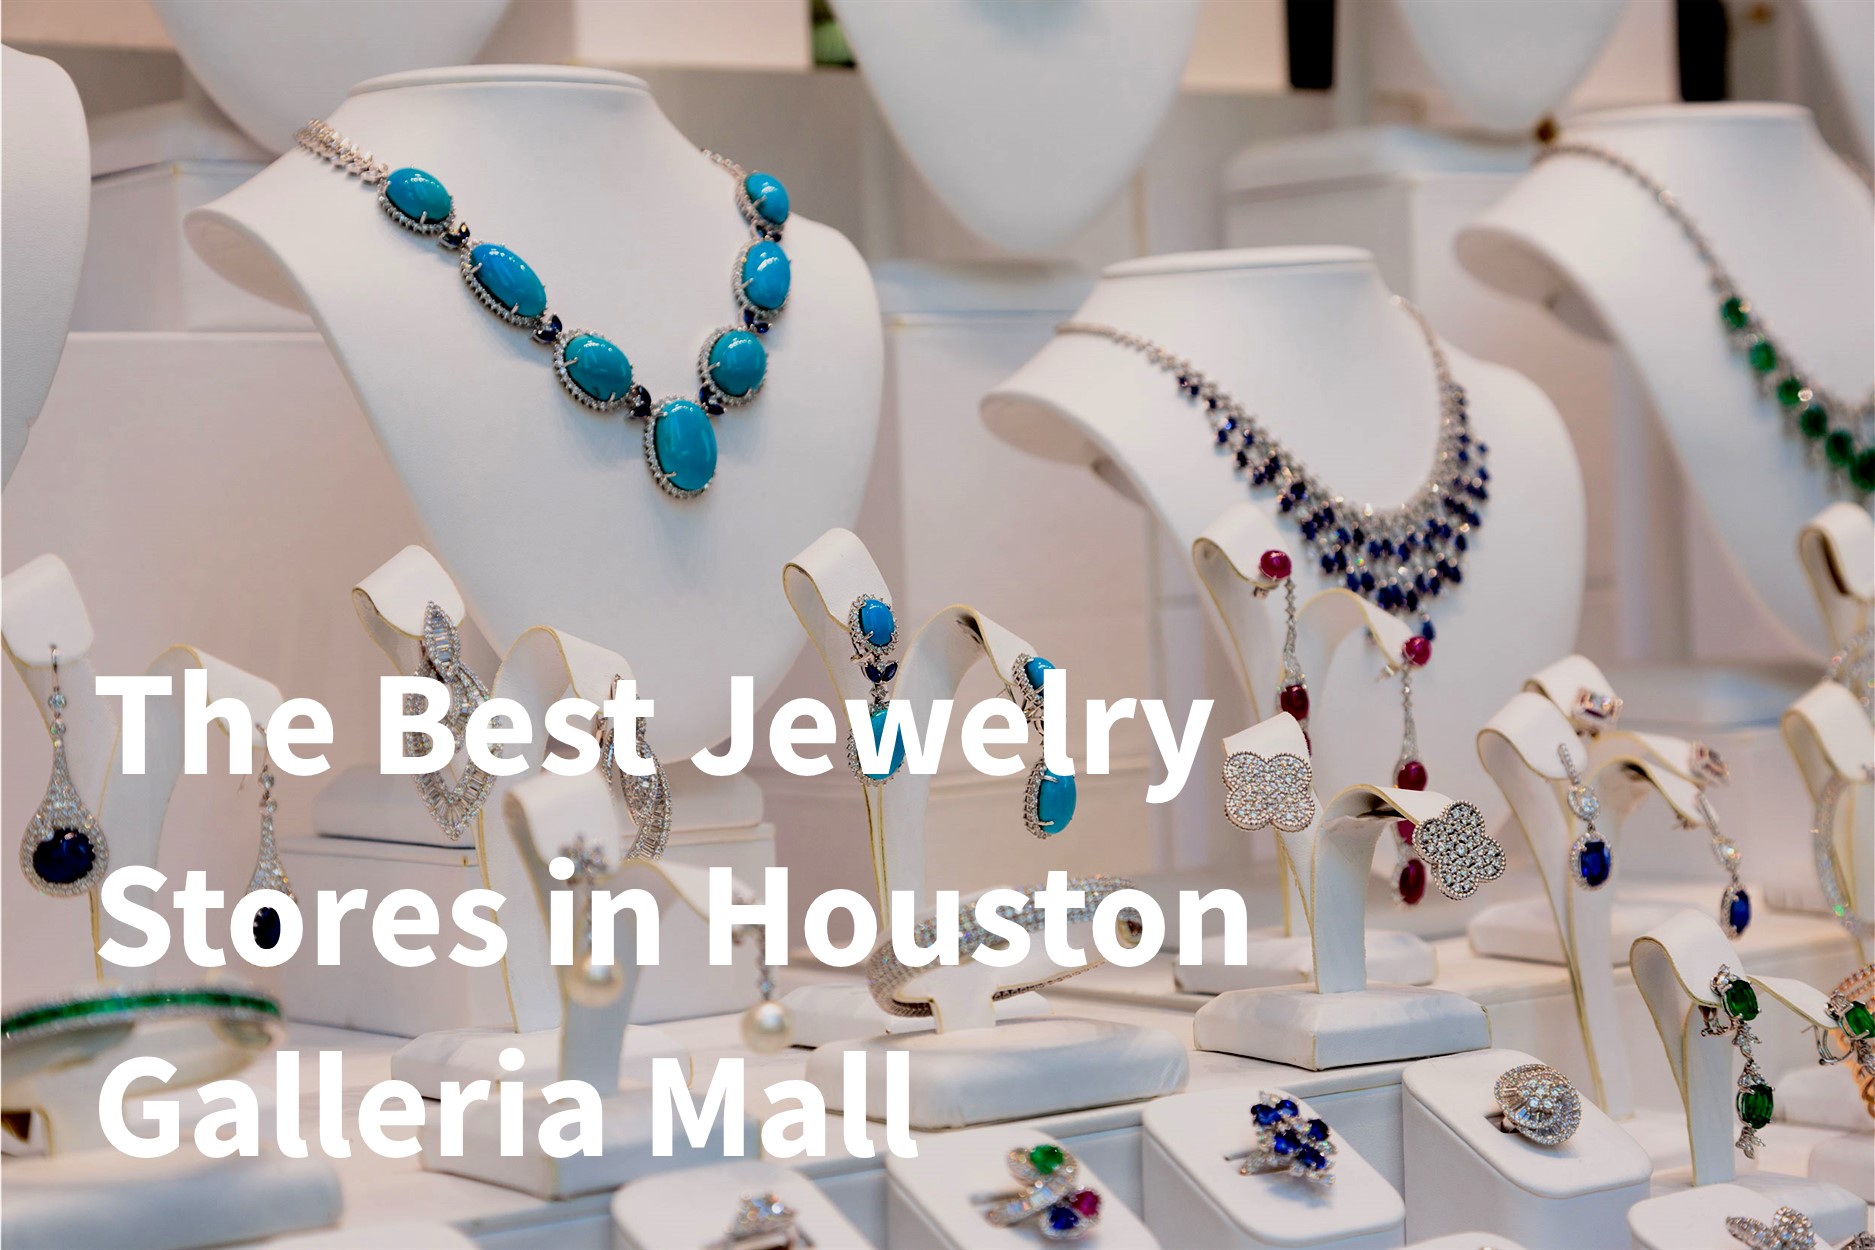 The Best Jewelry Stores in Houston Galleria Mall — Coming Soon!